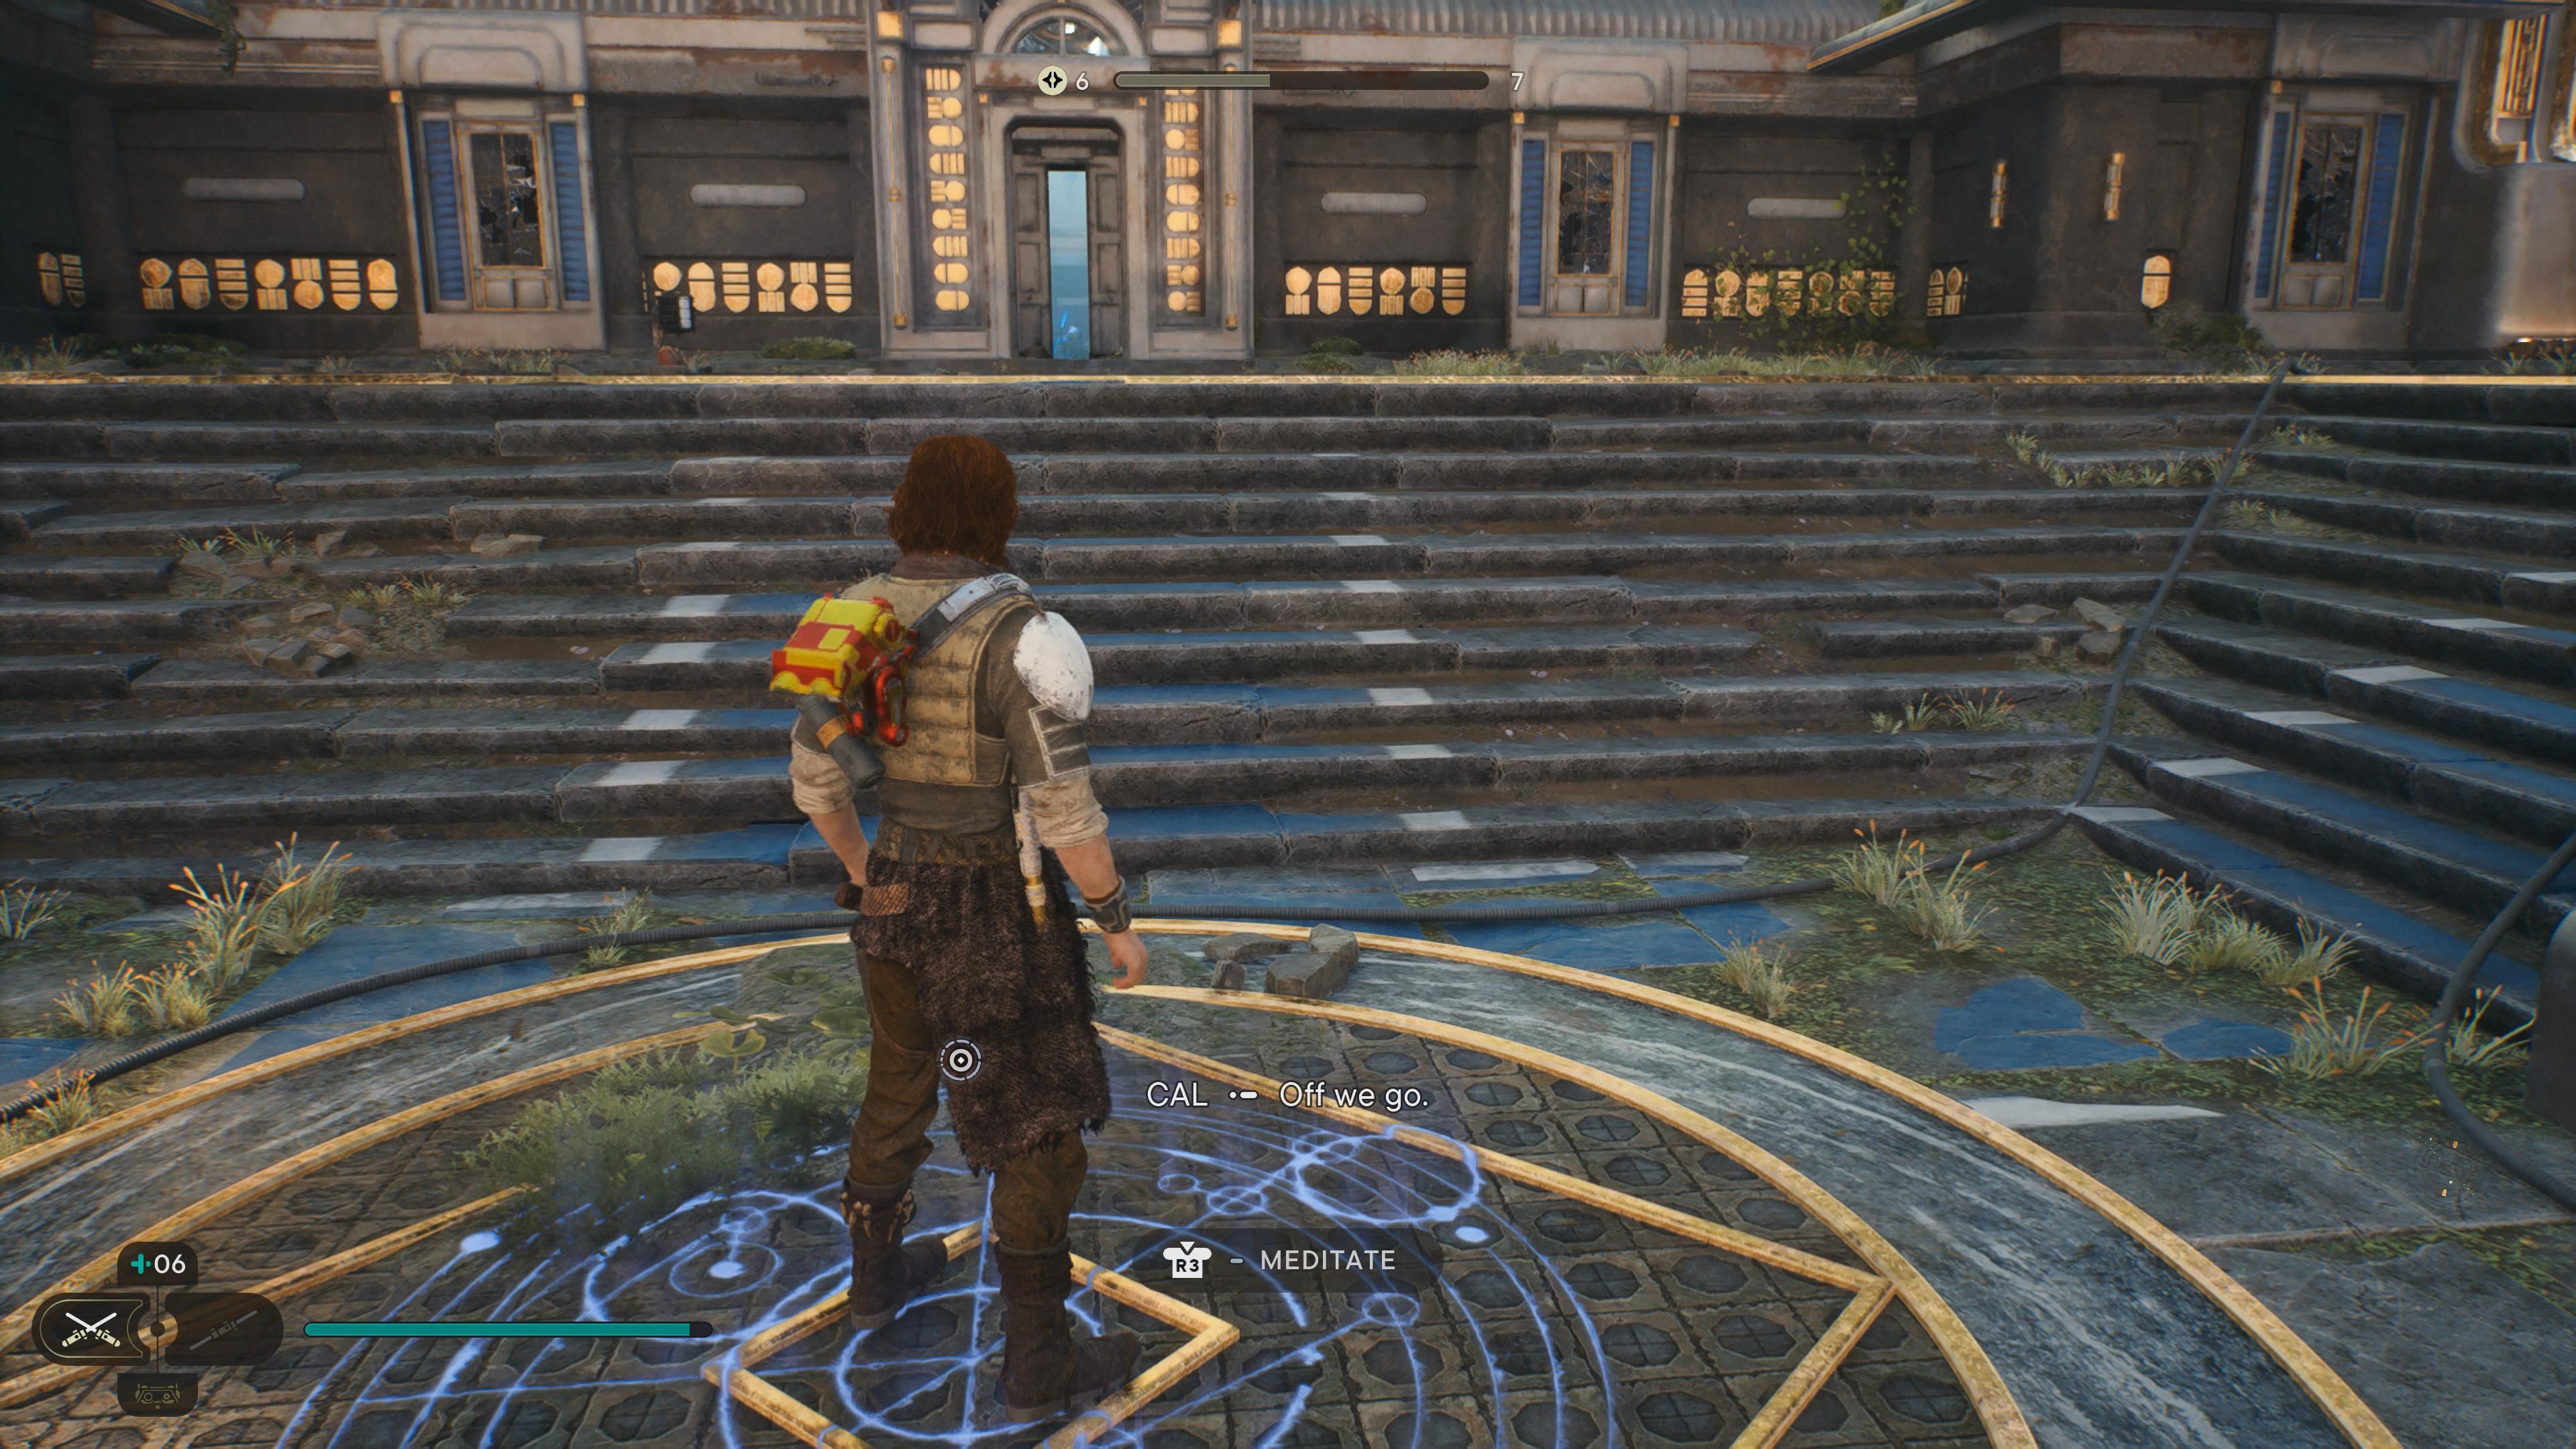 Cal at the Grand Courtyard meditation point in Jedi Survivor